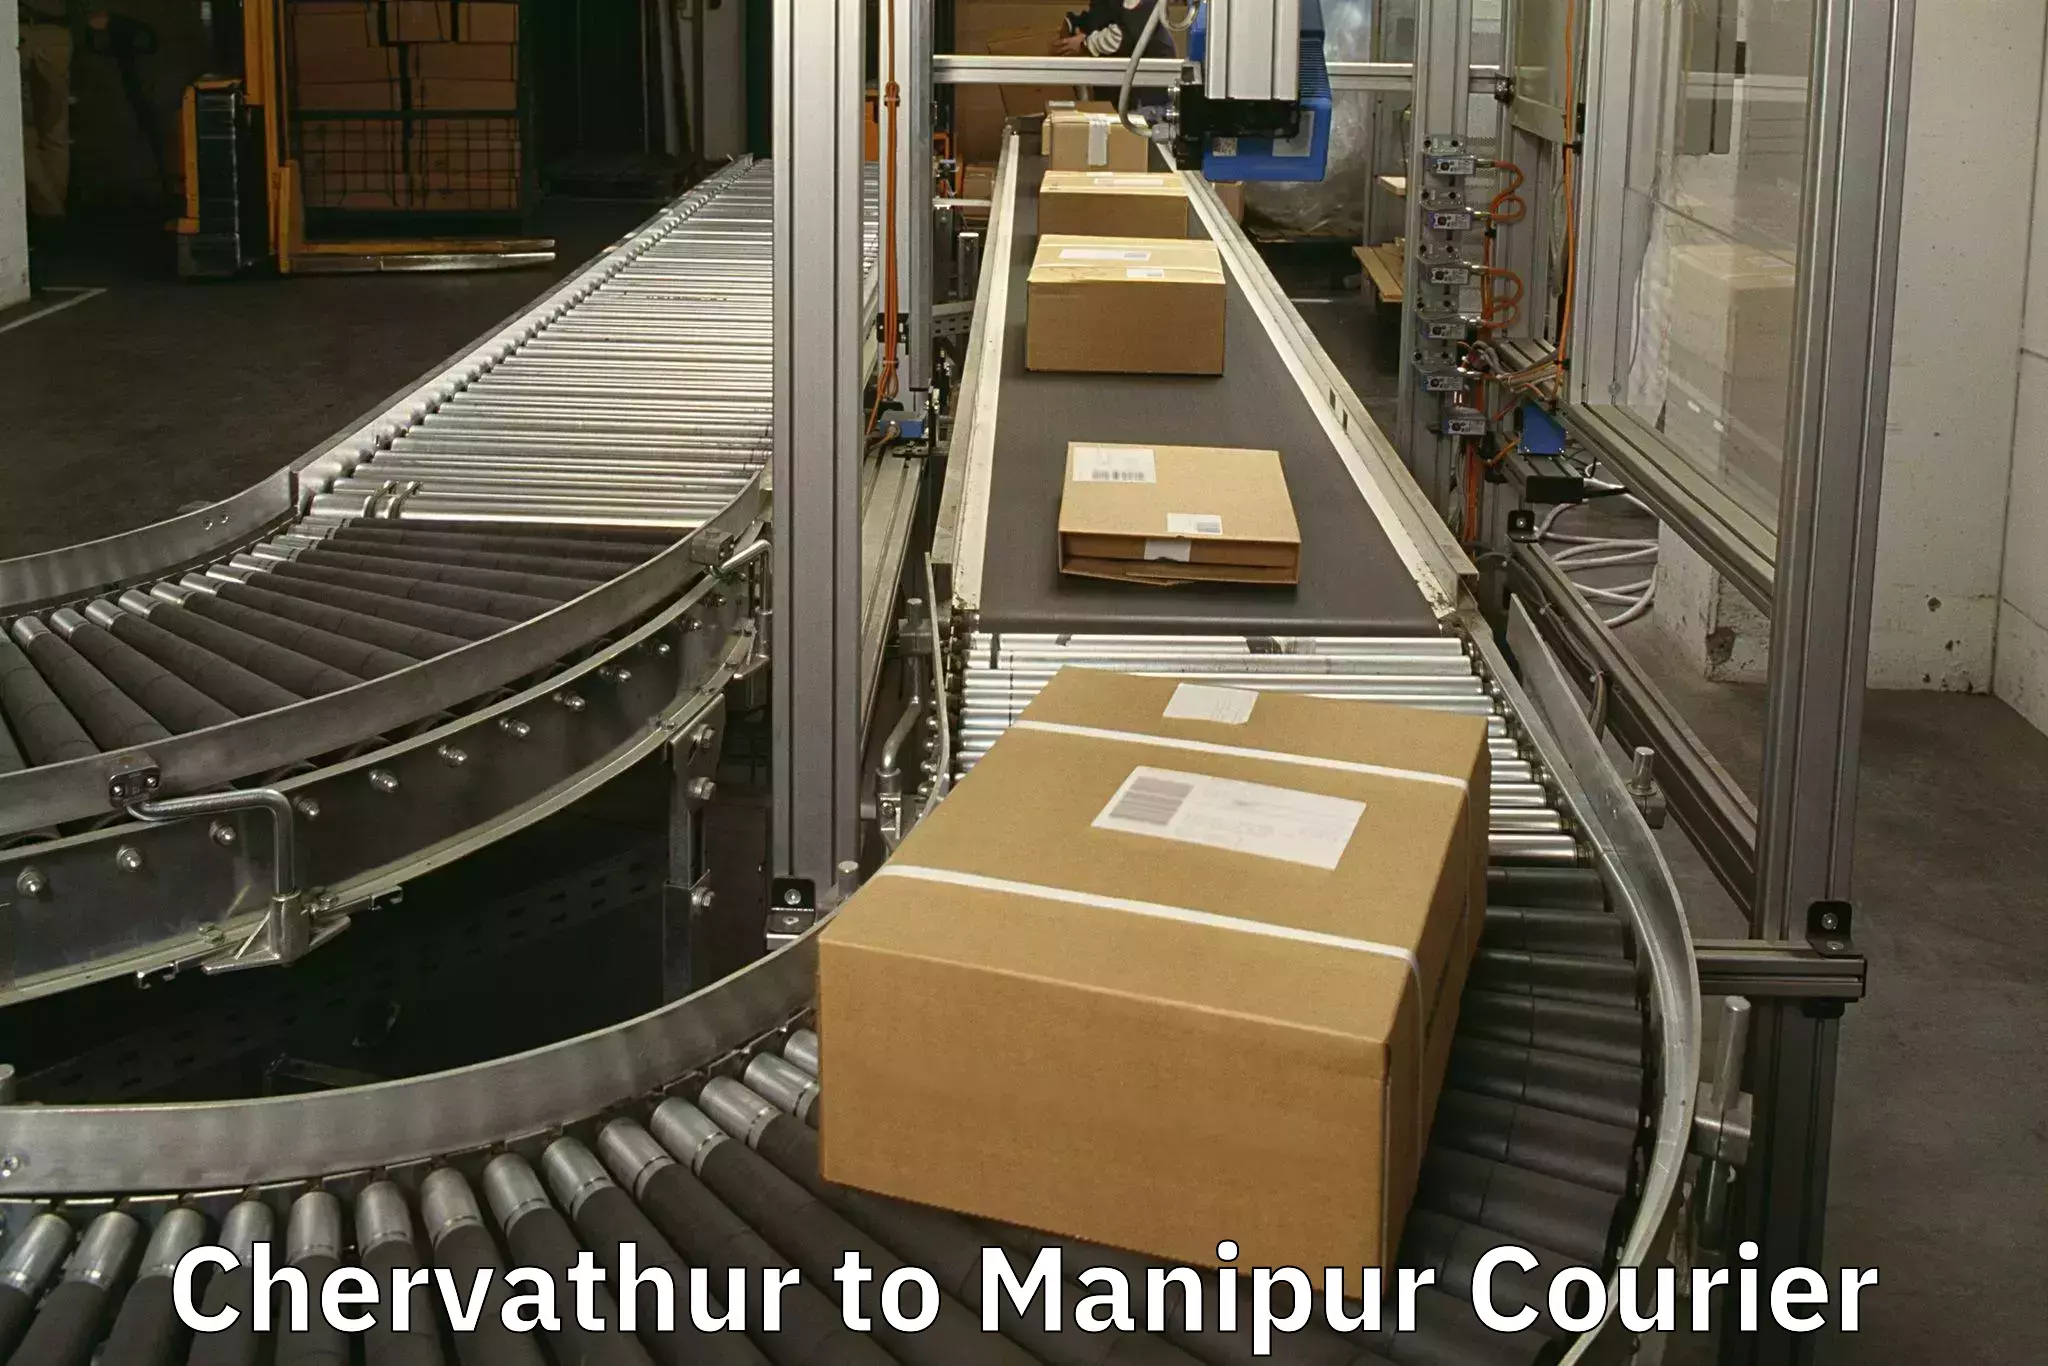 Luggage delivery network Chervathur to Manipur